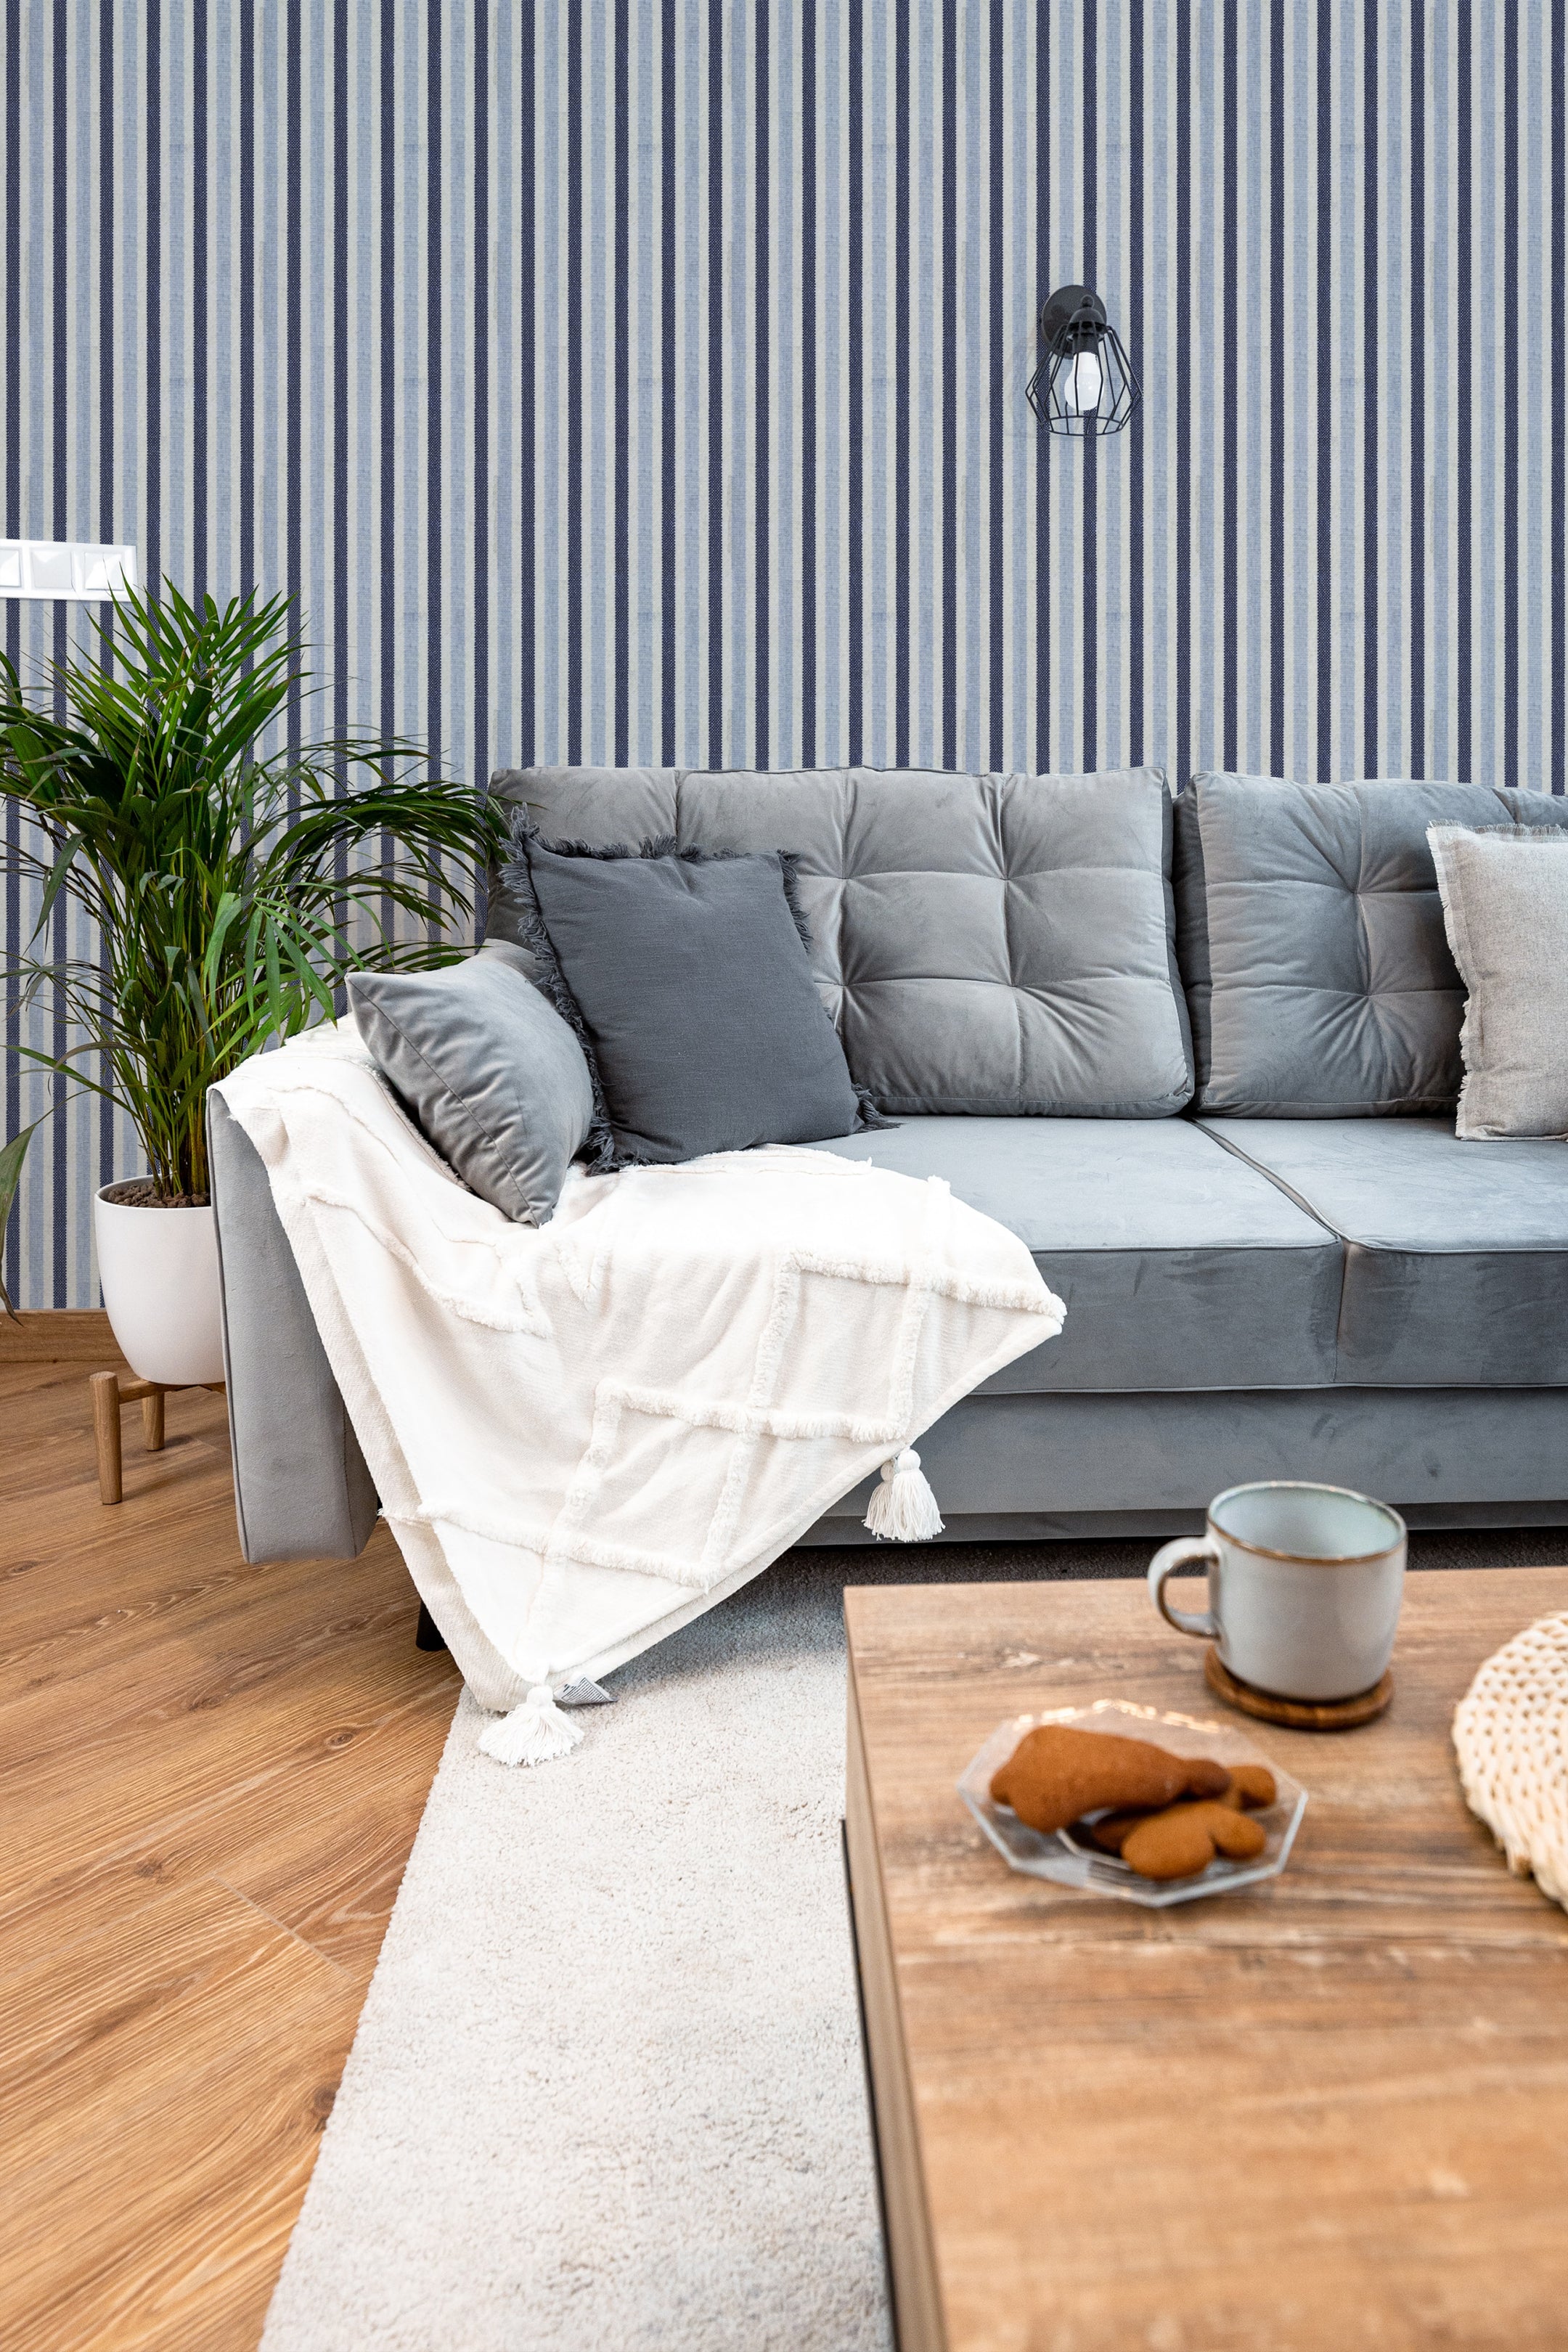 A modern living room with a comfortable gray sofa adorned with matching gray pillows and a white throw blanket. The wall behind the sofa is covered in navy and white striped wallpaper, adding a stylish and contemporary look to the room. A potted plant and a wooden coffee table with a mug and snacks complete the inviting setting.